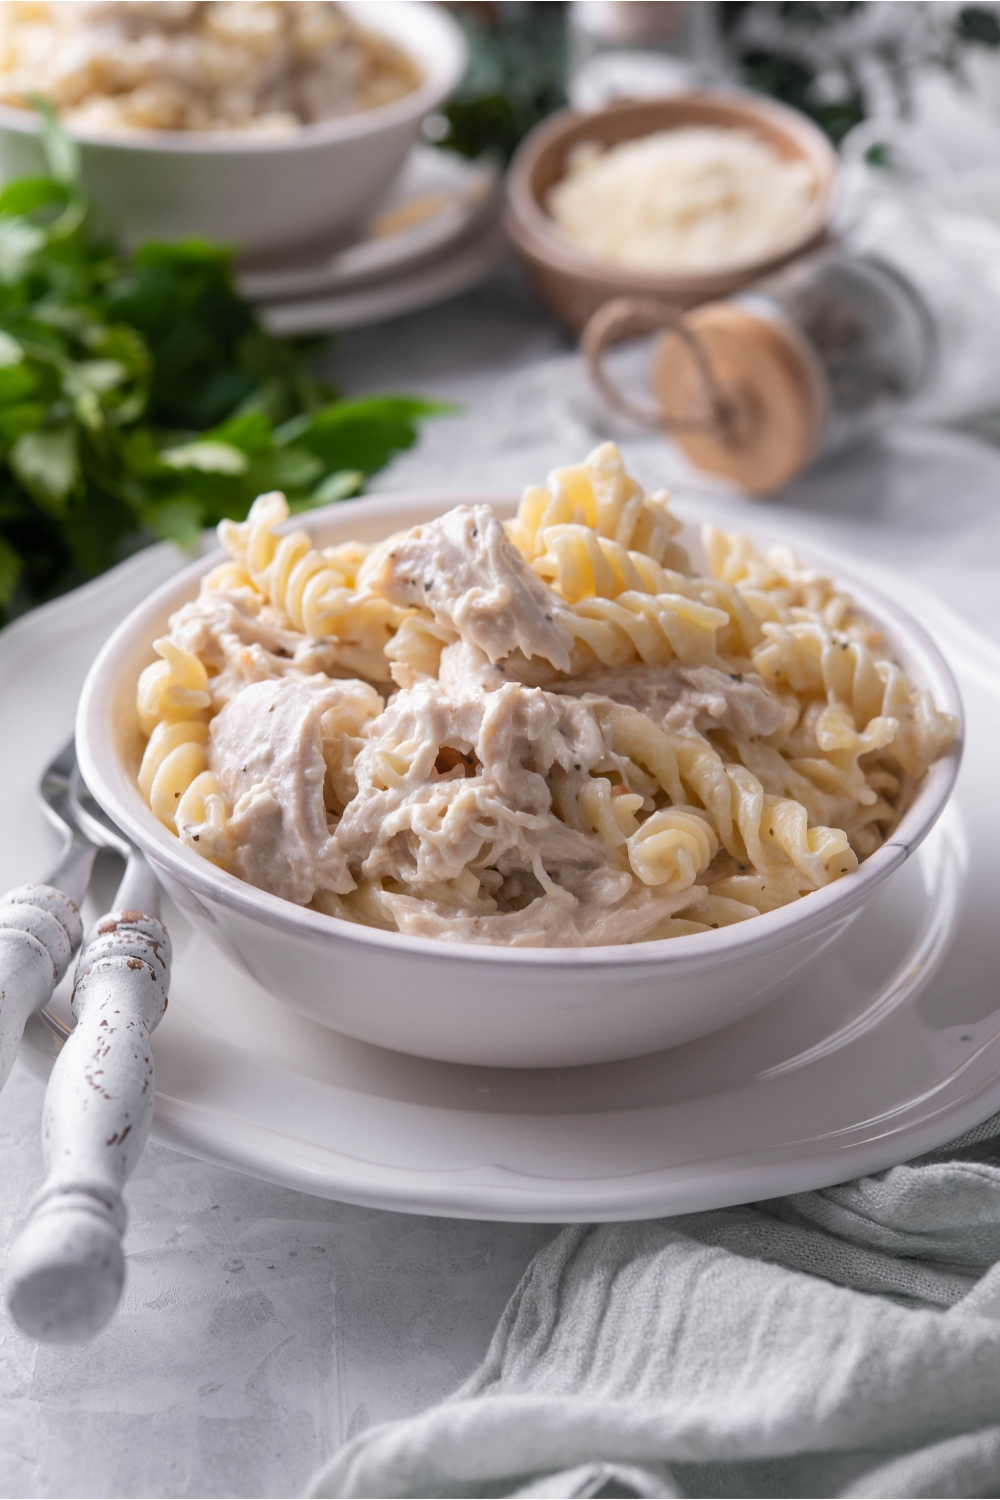 A bowl of pasta and chicken in a cream sauce atop a white plate with two forks next to the bowl of chicken and pasta.